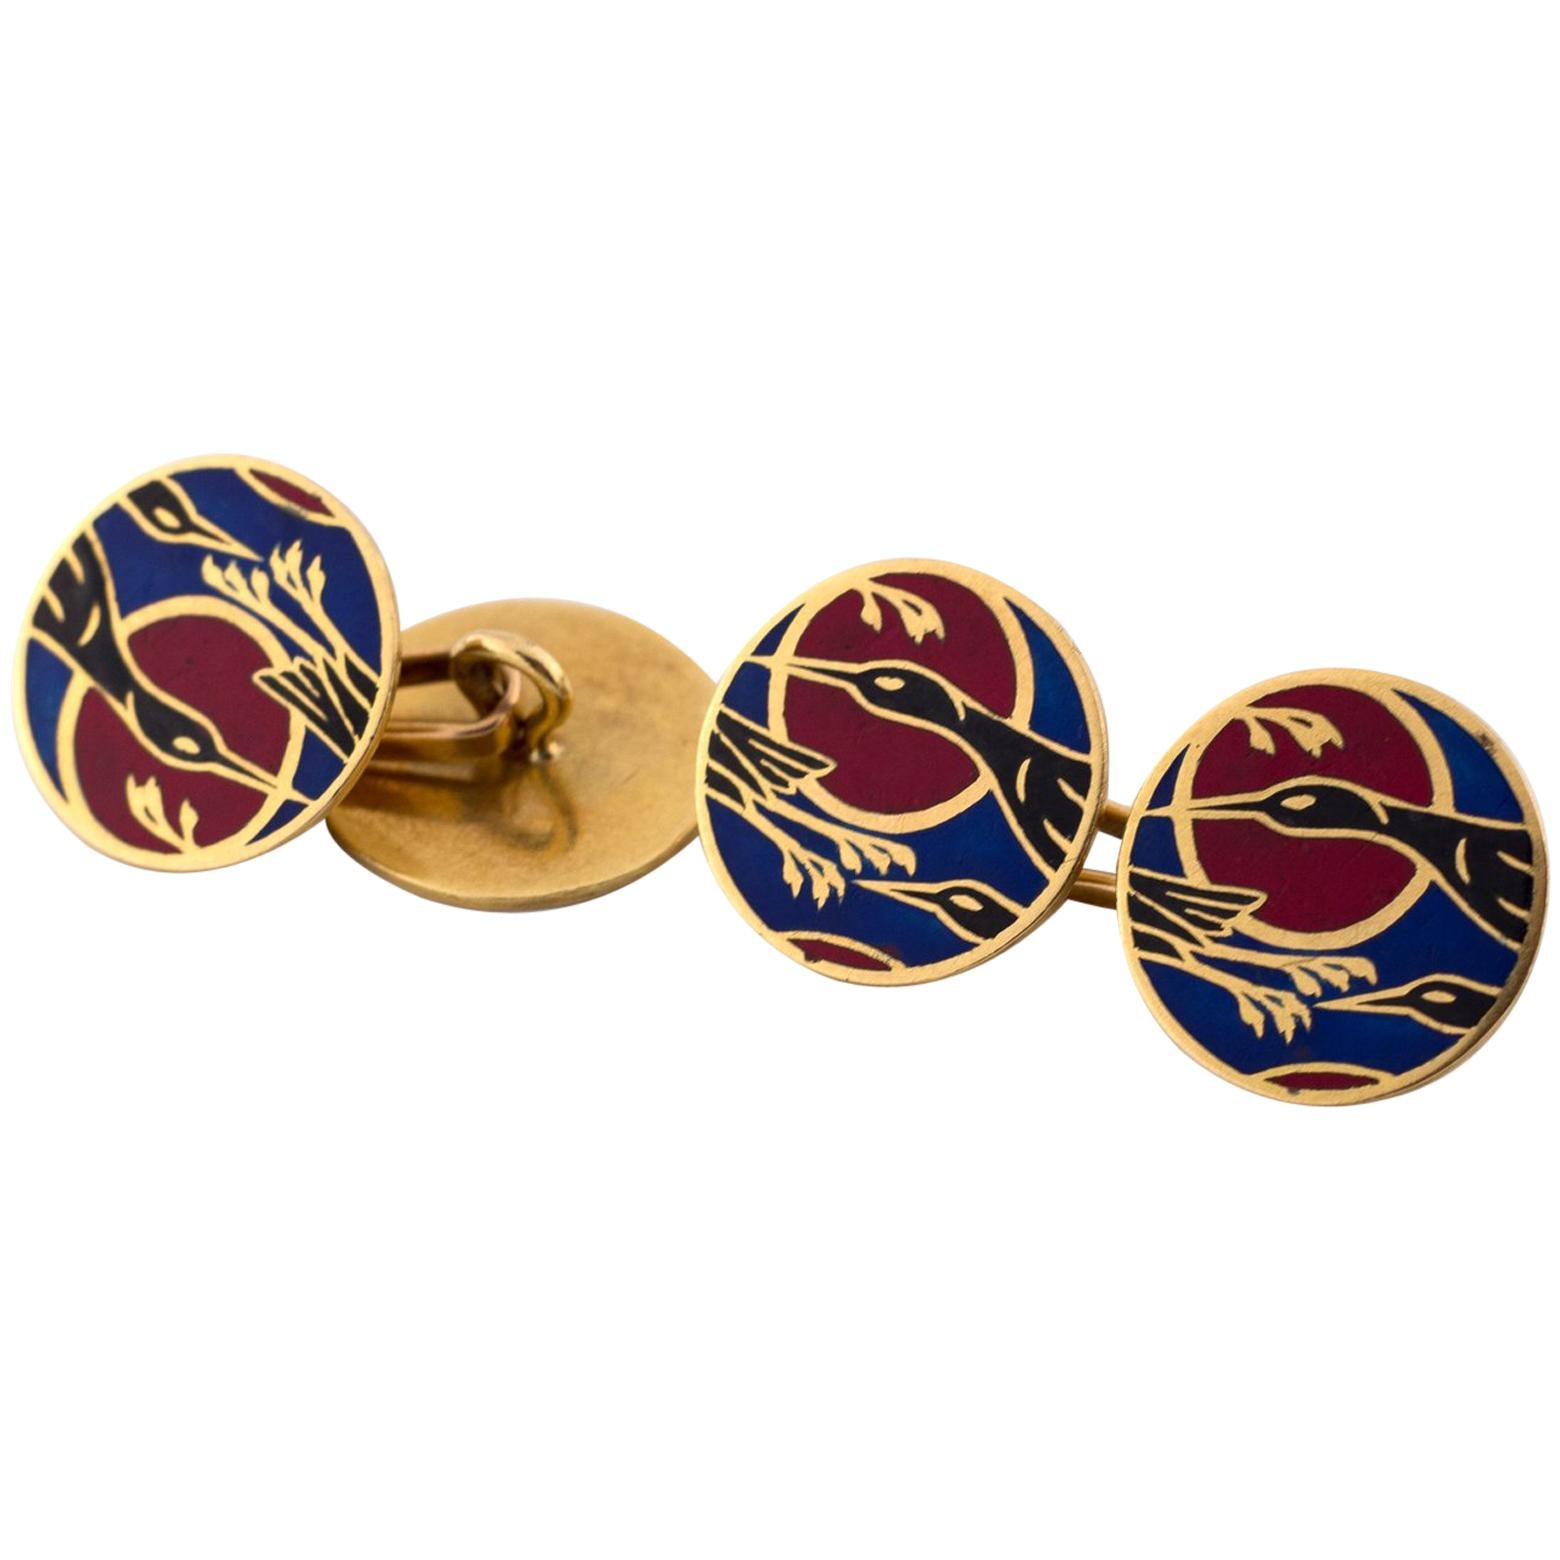 French 18 Karat Yellow Gold Cufflinks with Enamel Cranes in Blue, Black and Red